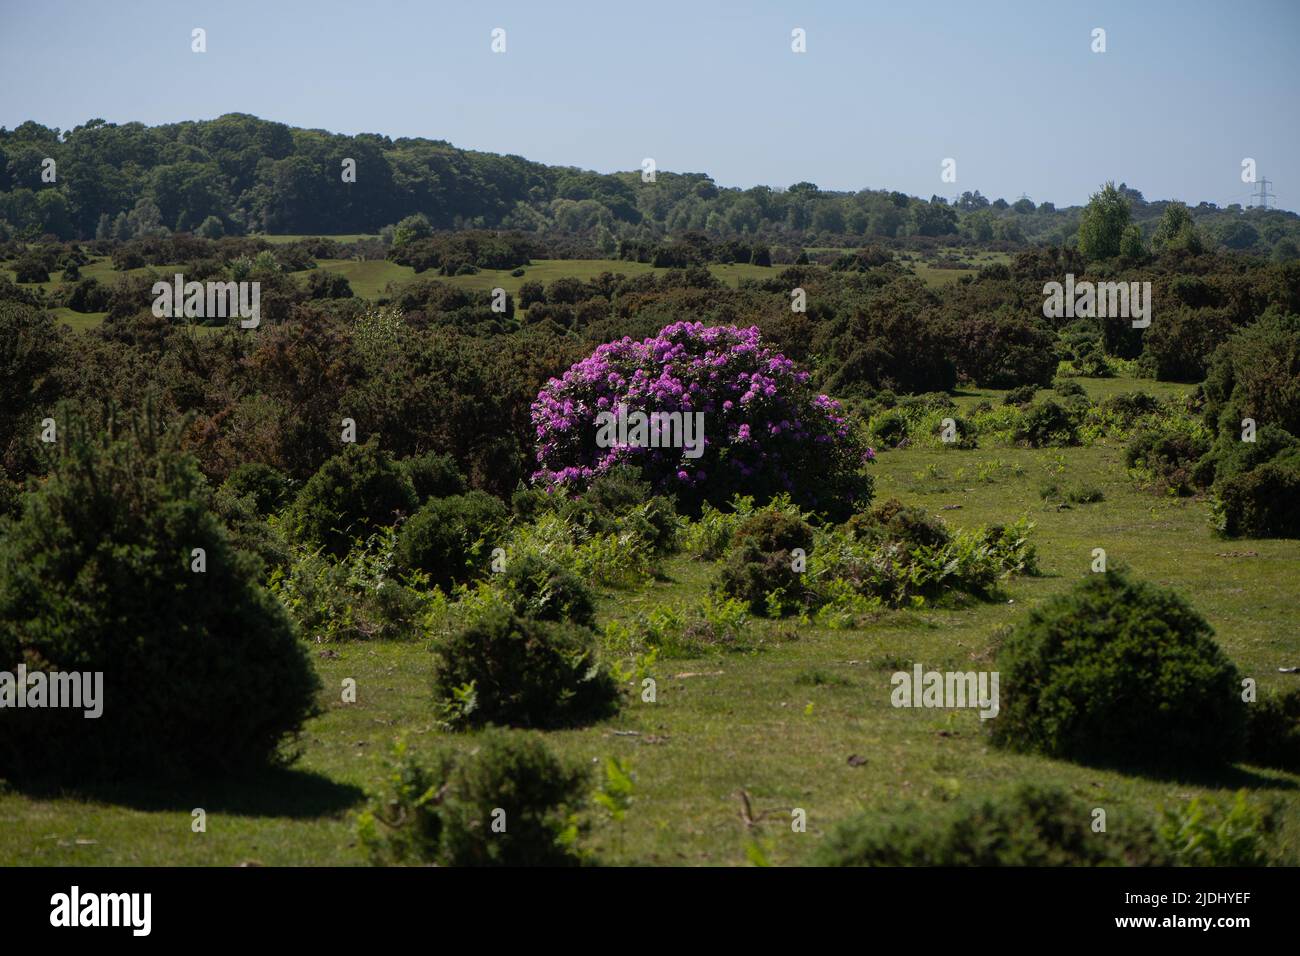 Rhododendron ponticum is an established non-native invasive species within the UK, seen in this image a lone bush amongst the gorse in the New Forest. Stock Photo